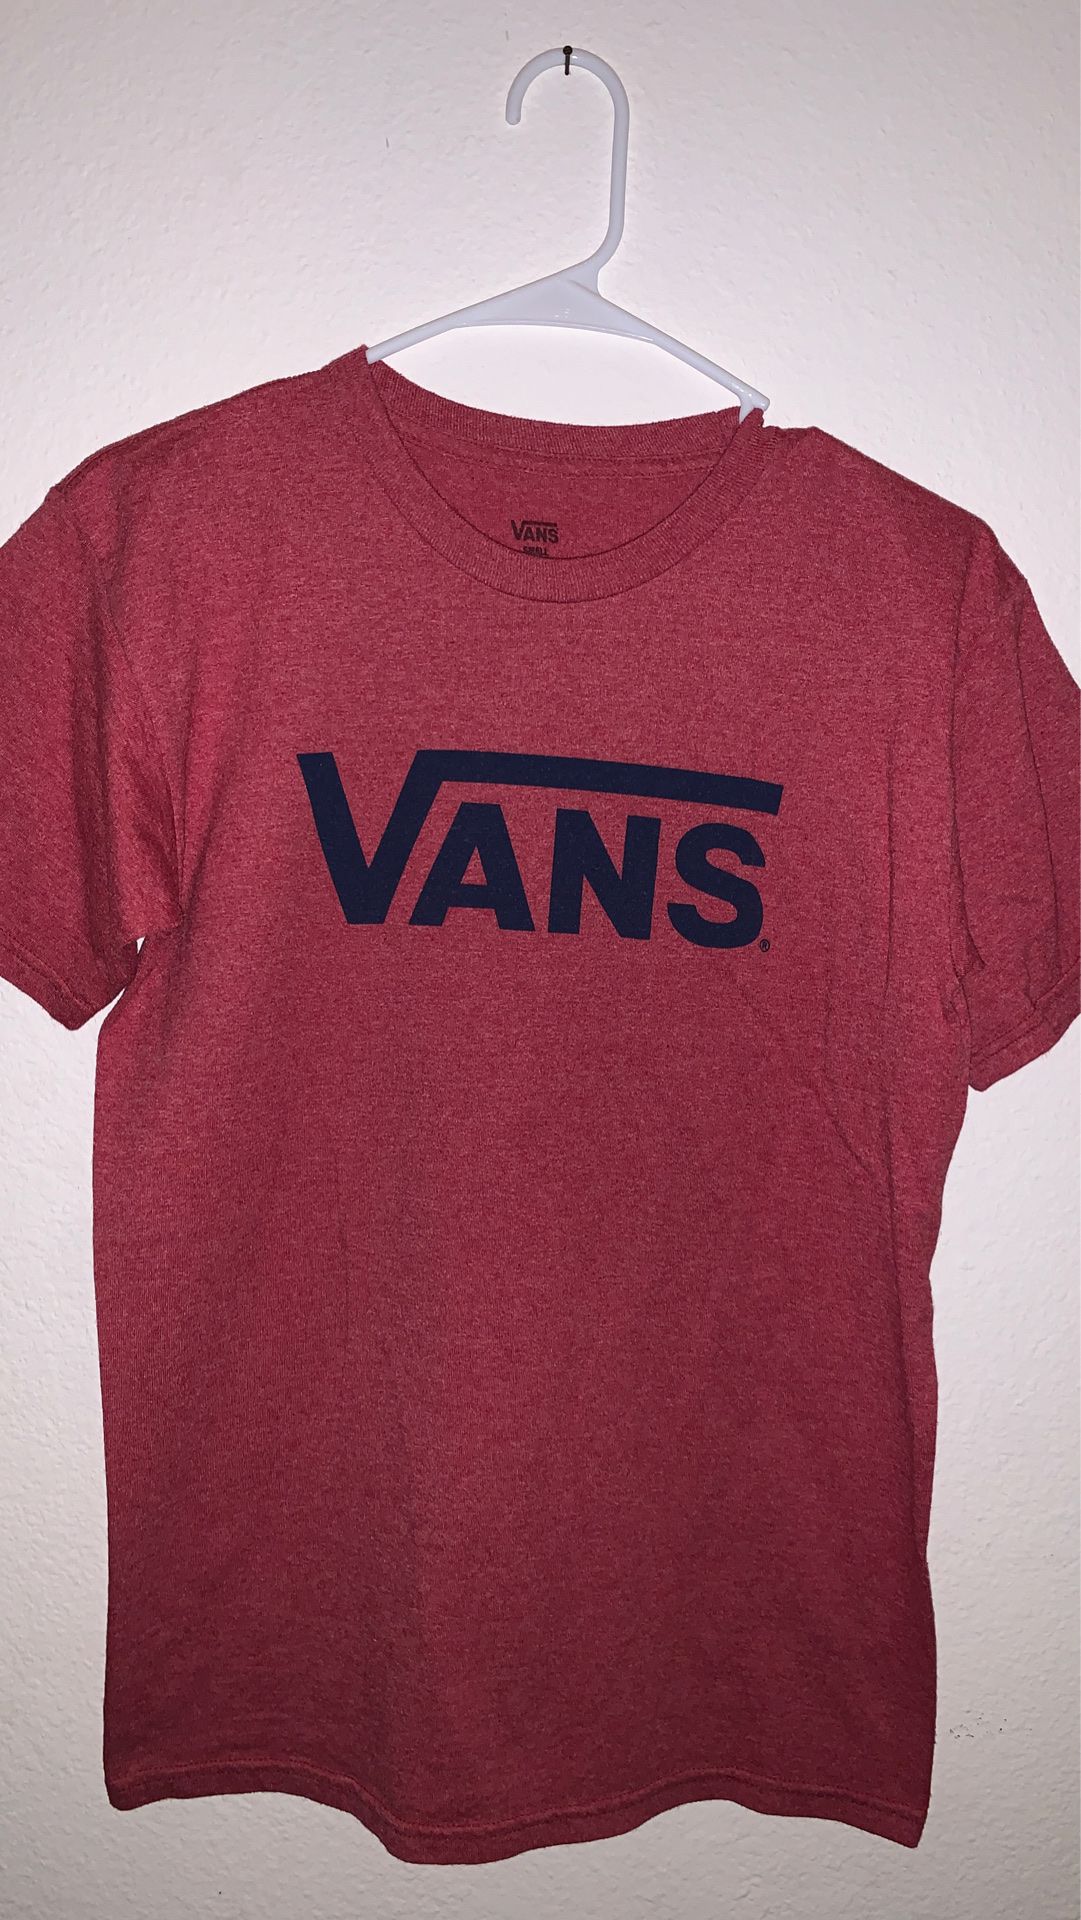 Vans T-shirt size adult small